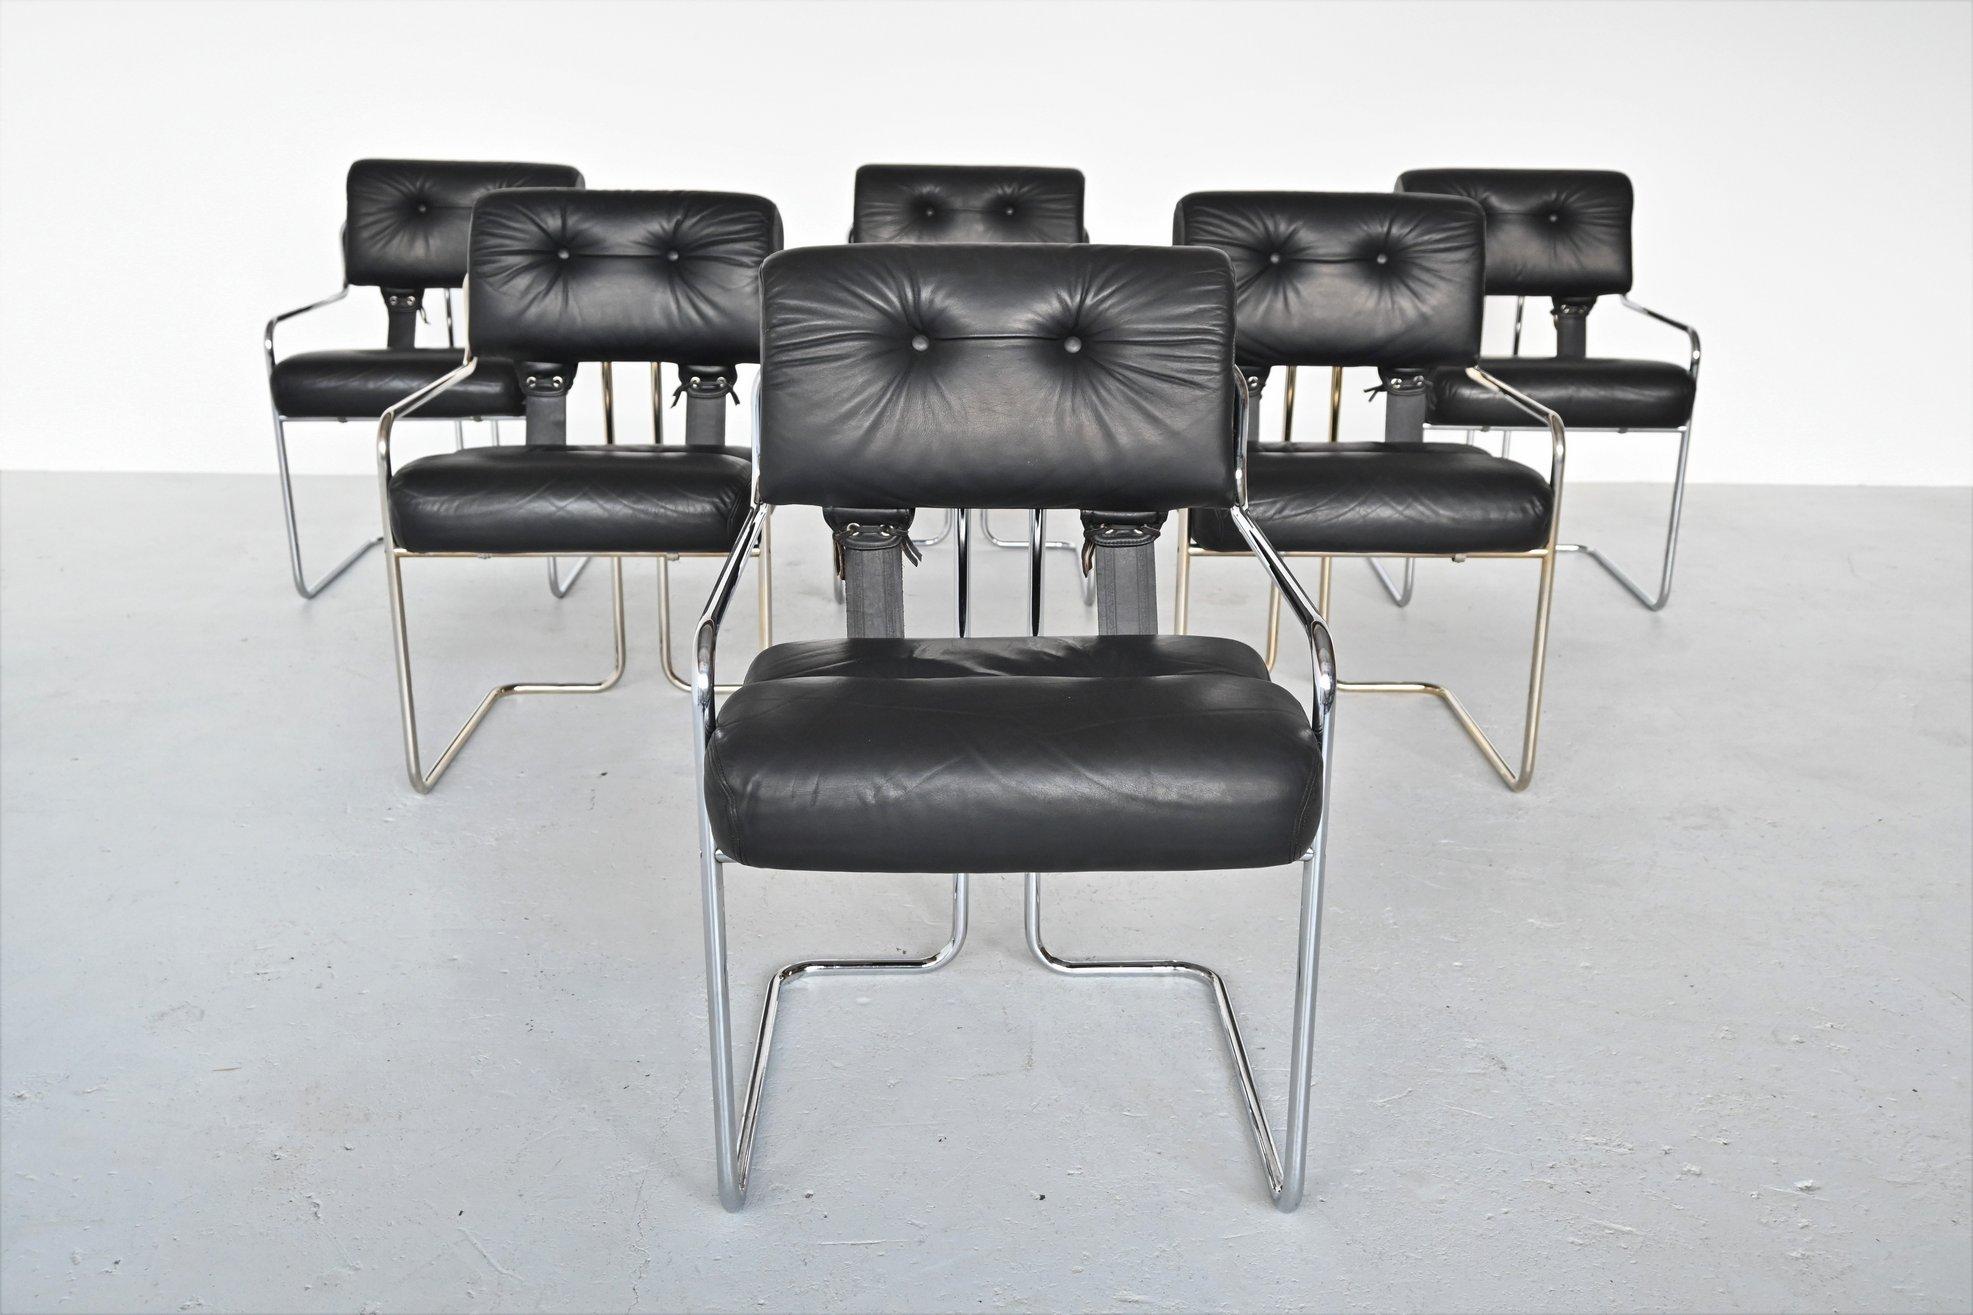 Fantastic set of 6 Tucroma dining armchairs designed Guido Faleschini for i4 Mariani, Italy 1970. These beautiful shaped chairs are hard to find in a set of 6. They have a chromed tubular metal frame and a padded leather seat and back that are